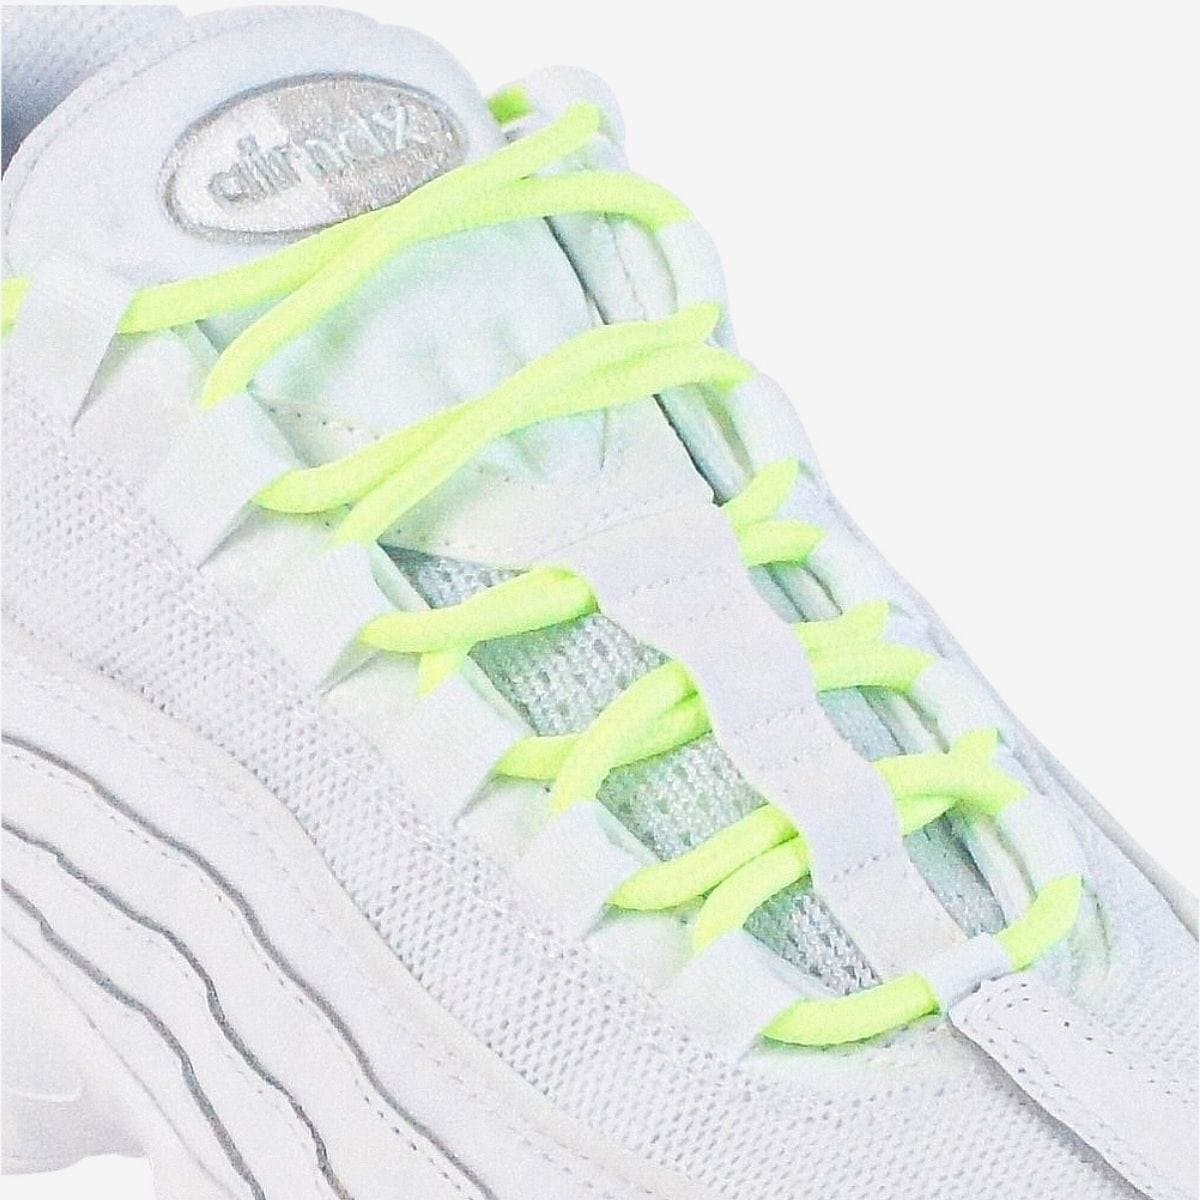 fluorescent-green-round-rope-shoelaces-for-sneakers-and-running-shoes